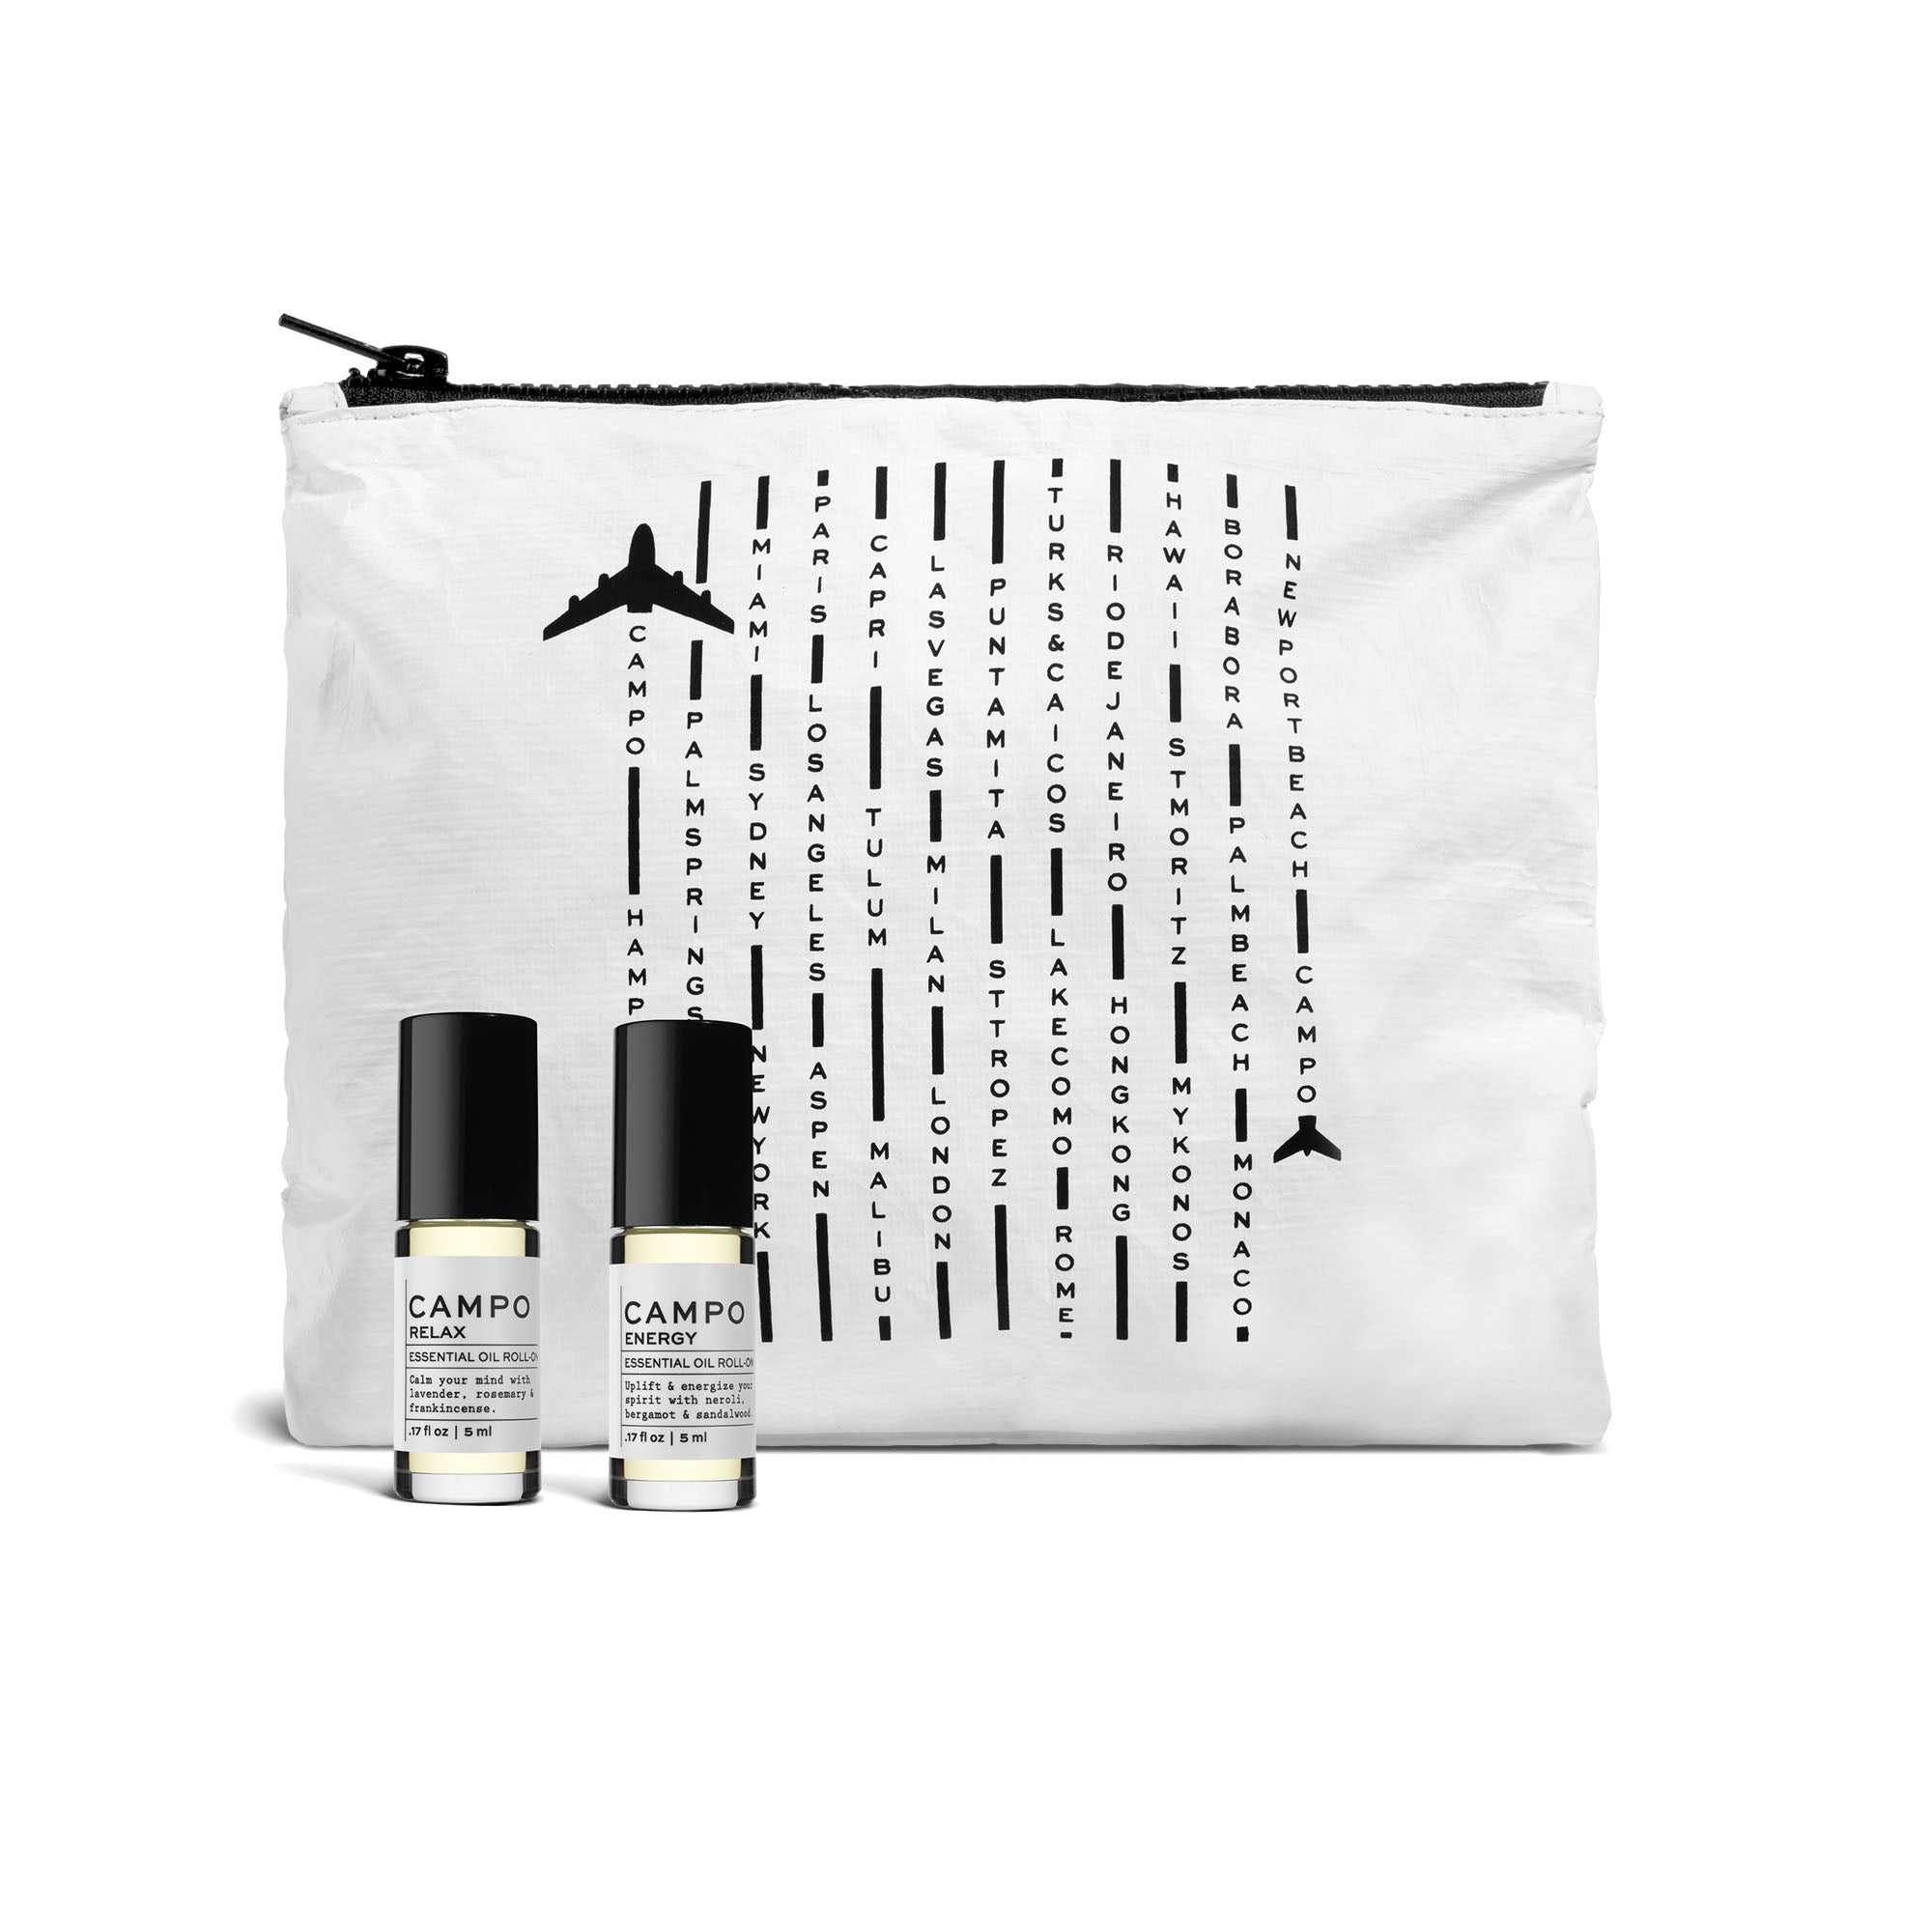 The perfect essential oil roll-on duo to uplift your spirits and help you relax on the go. Ease jitters and combat jet lag with these metal ball roll-ons that provide soothing pulse point therapy in any time zone. From LA to NY & beyond this signature jet-set bag is perfect for travel and made from coated, protective Tyvek material (wet/dry).            